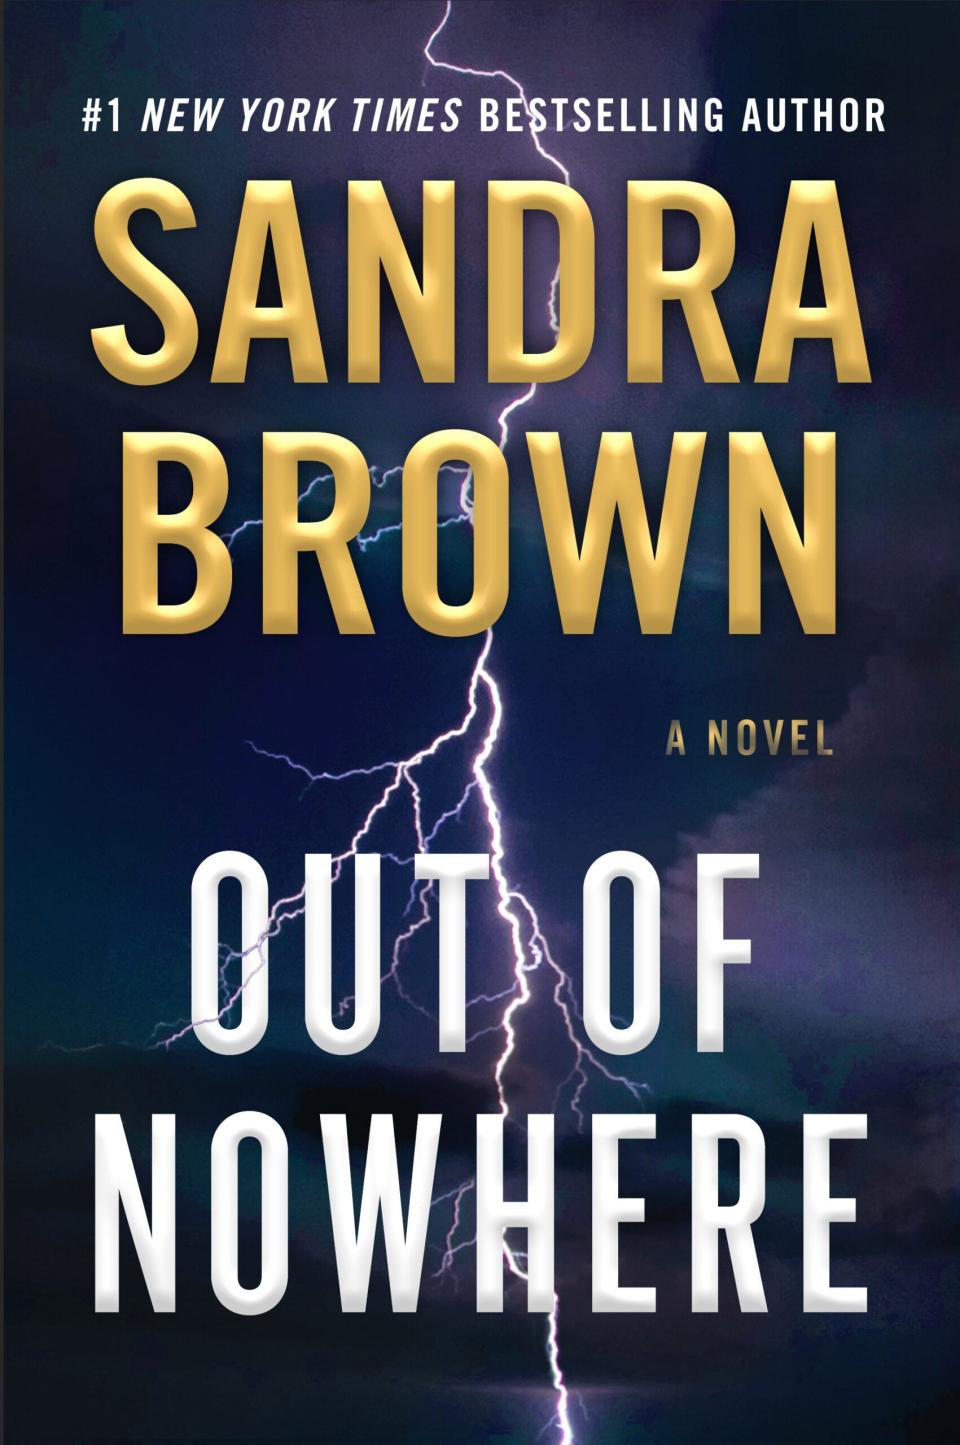 Sandra Brown, who has authored more than 70 New York Times bestselling novels, will be the featured speaker on Nov. 16 at the Canton Palace Theatre as part of a Stark Library event. Reservations can be made online through Eventbrite.